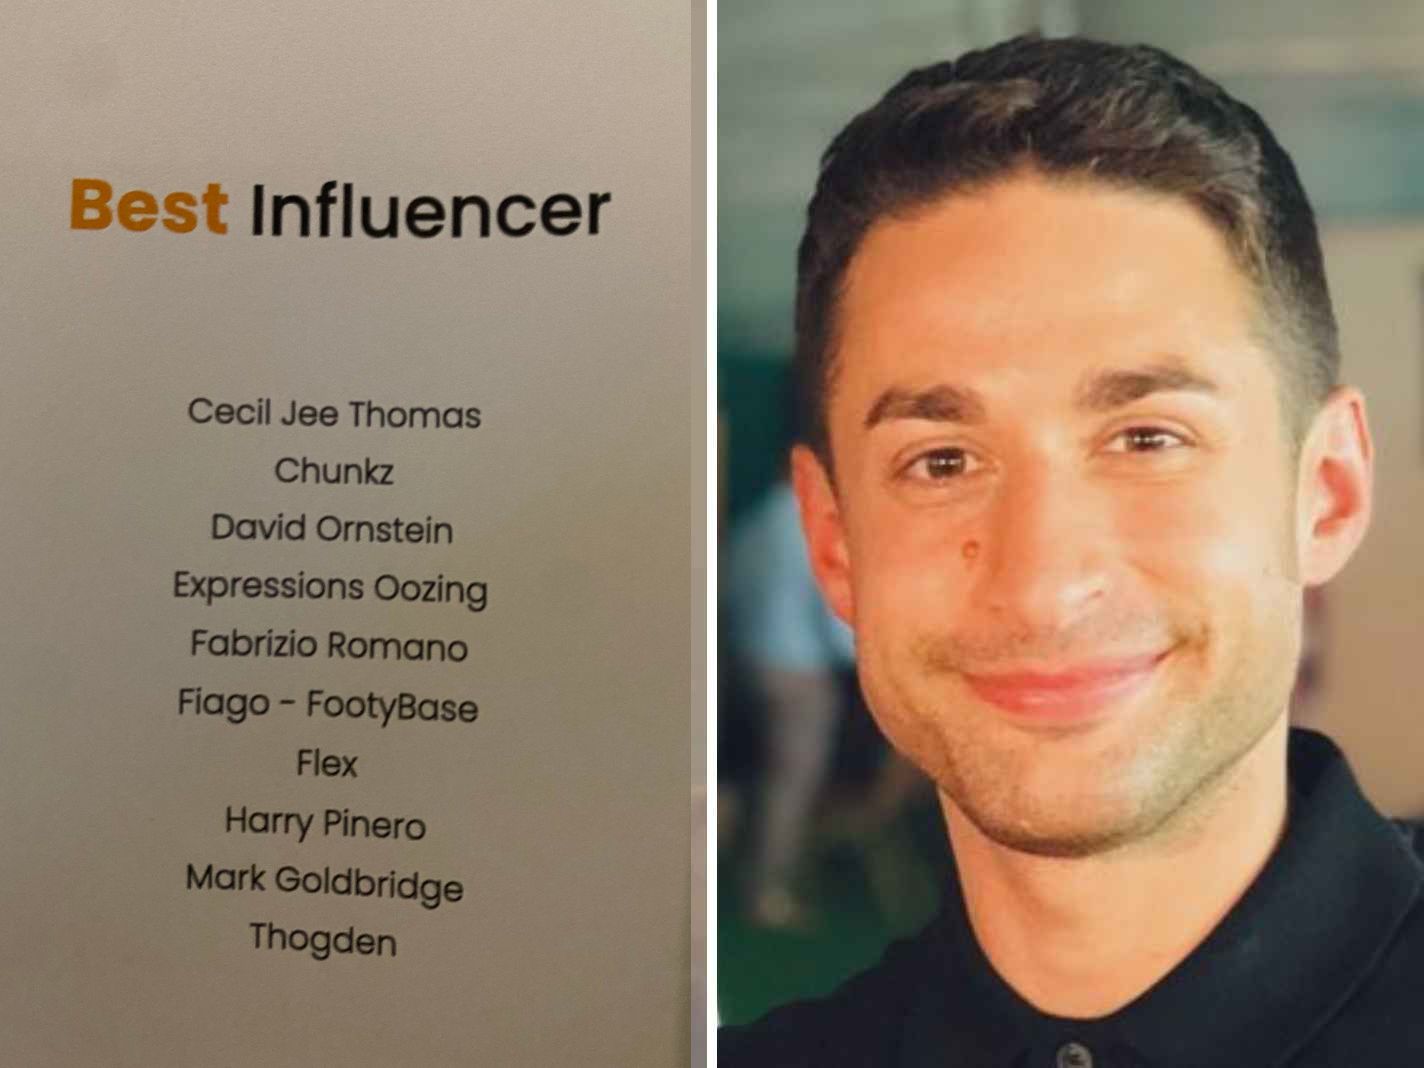 Putting David Ornstein in the ‘Best Influencer’ Category is a Travesty